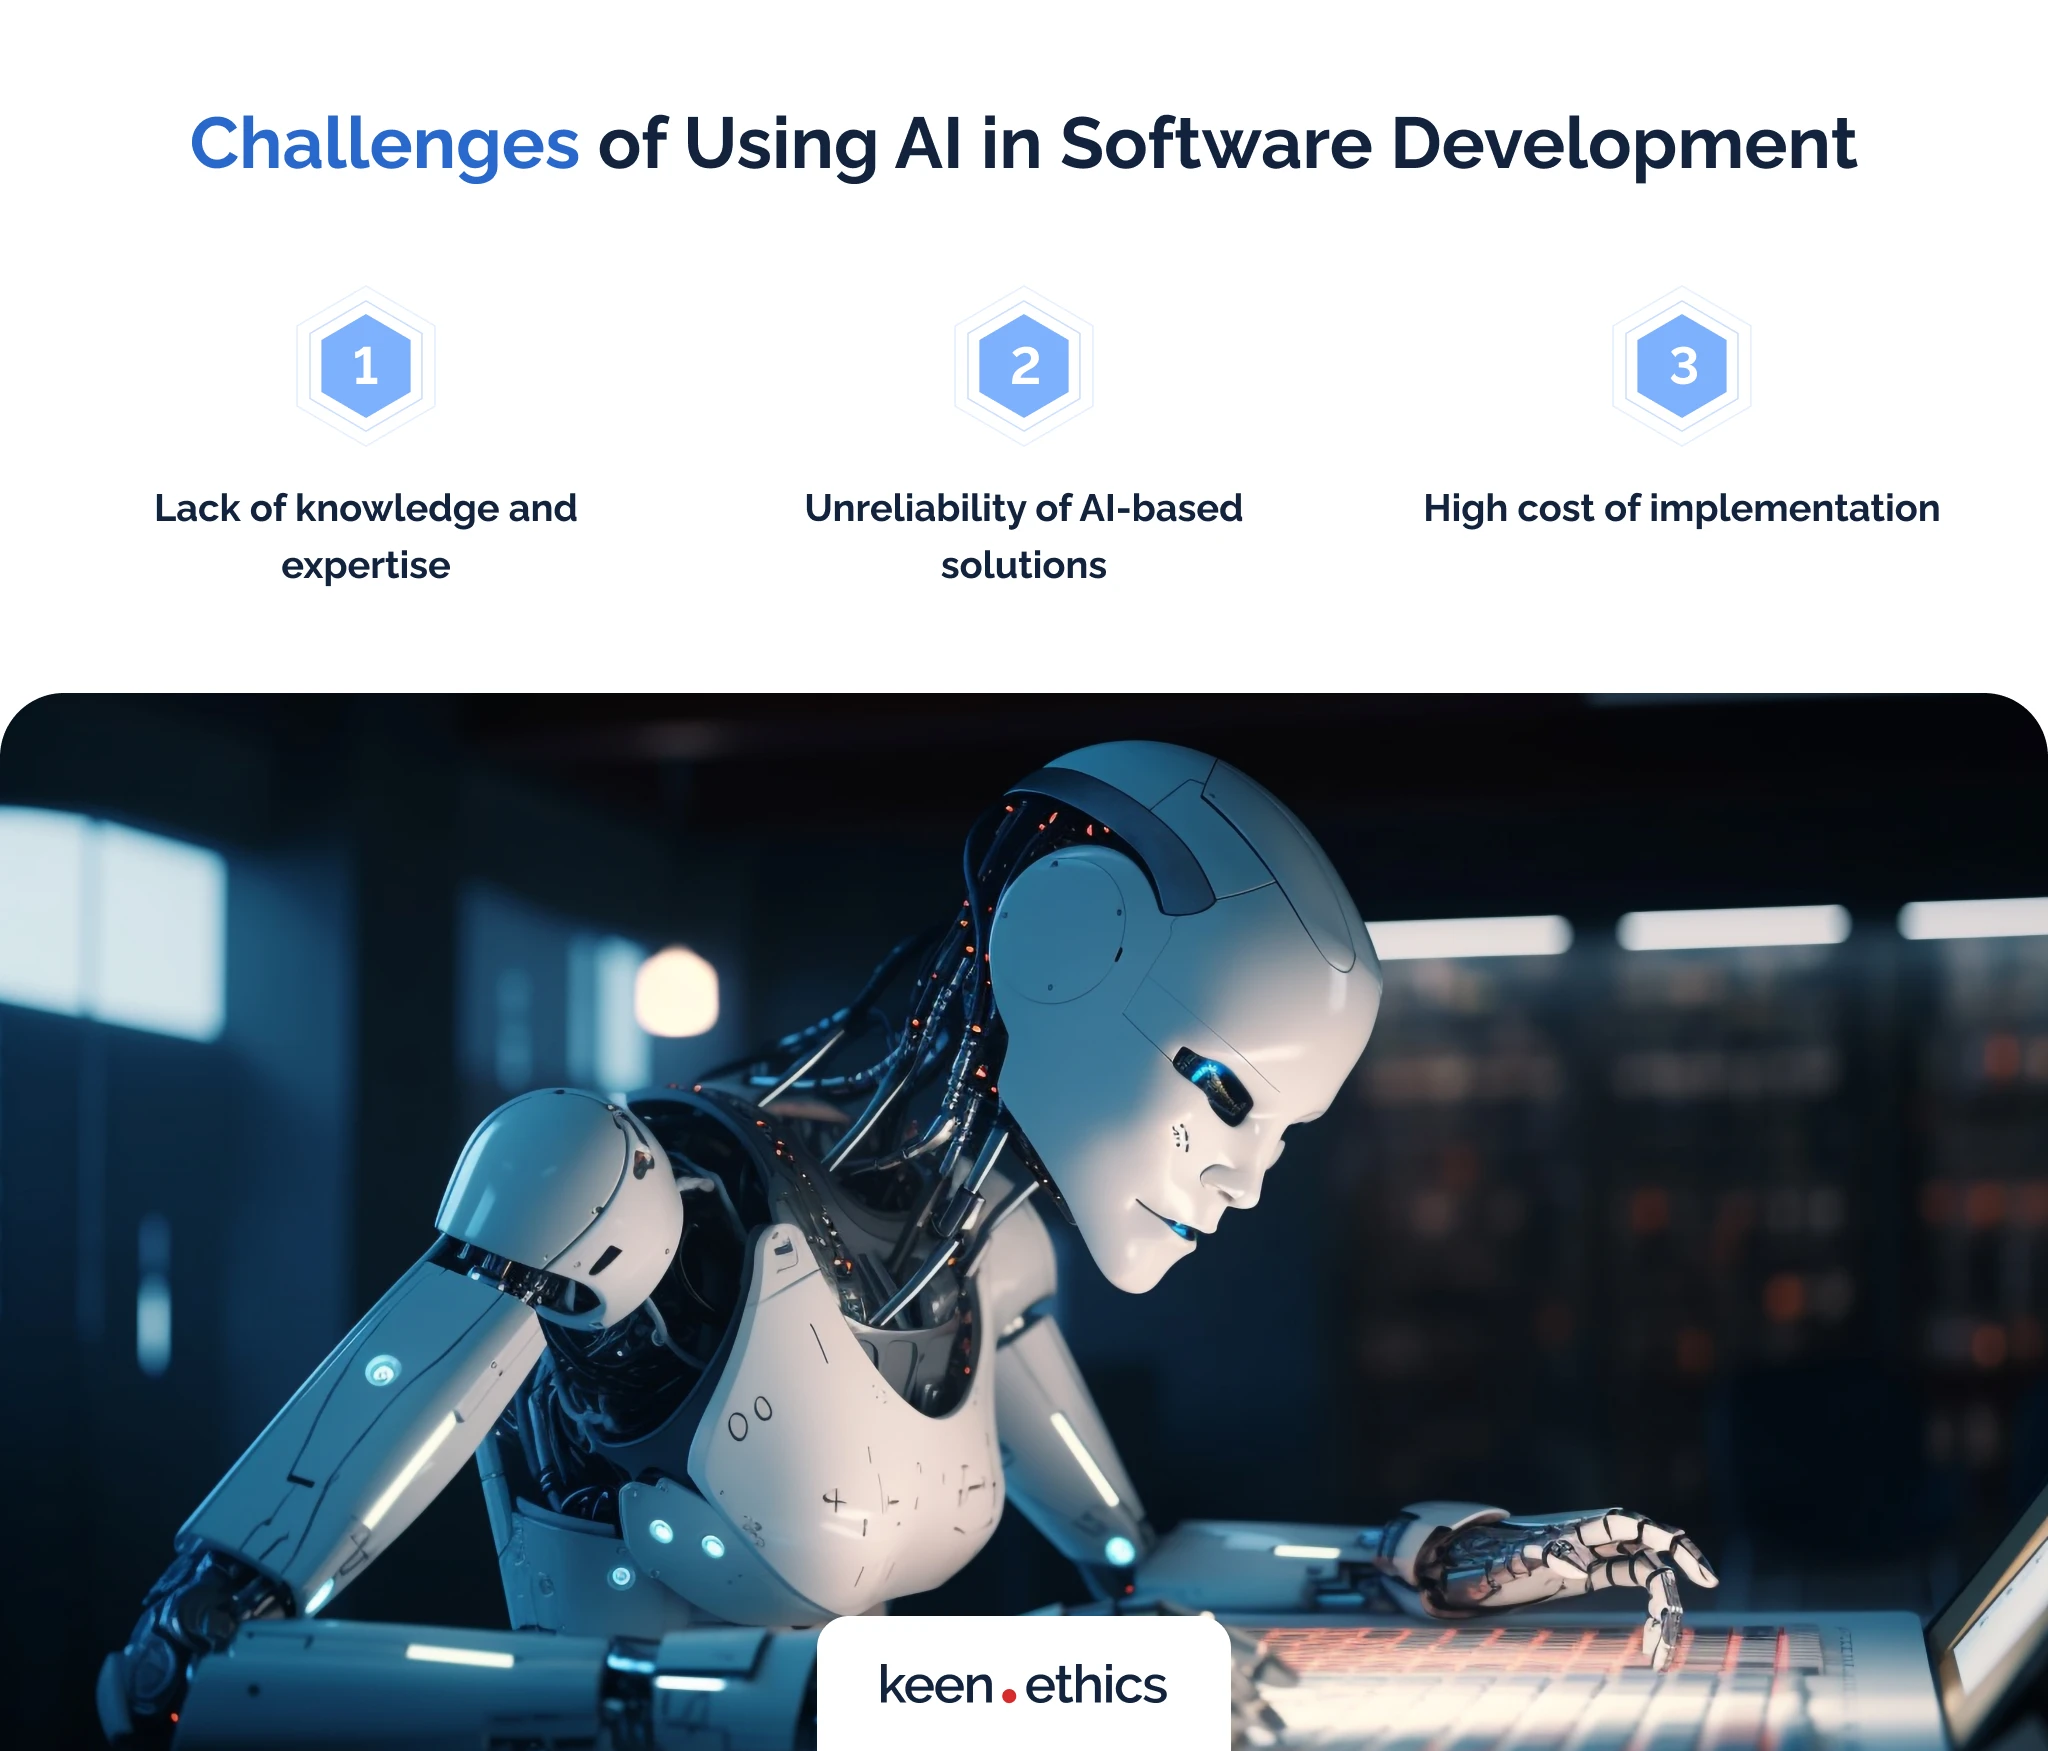 Challenges of using AI in software development